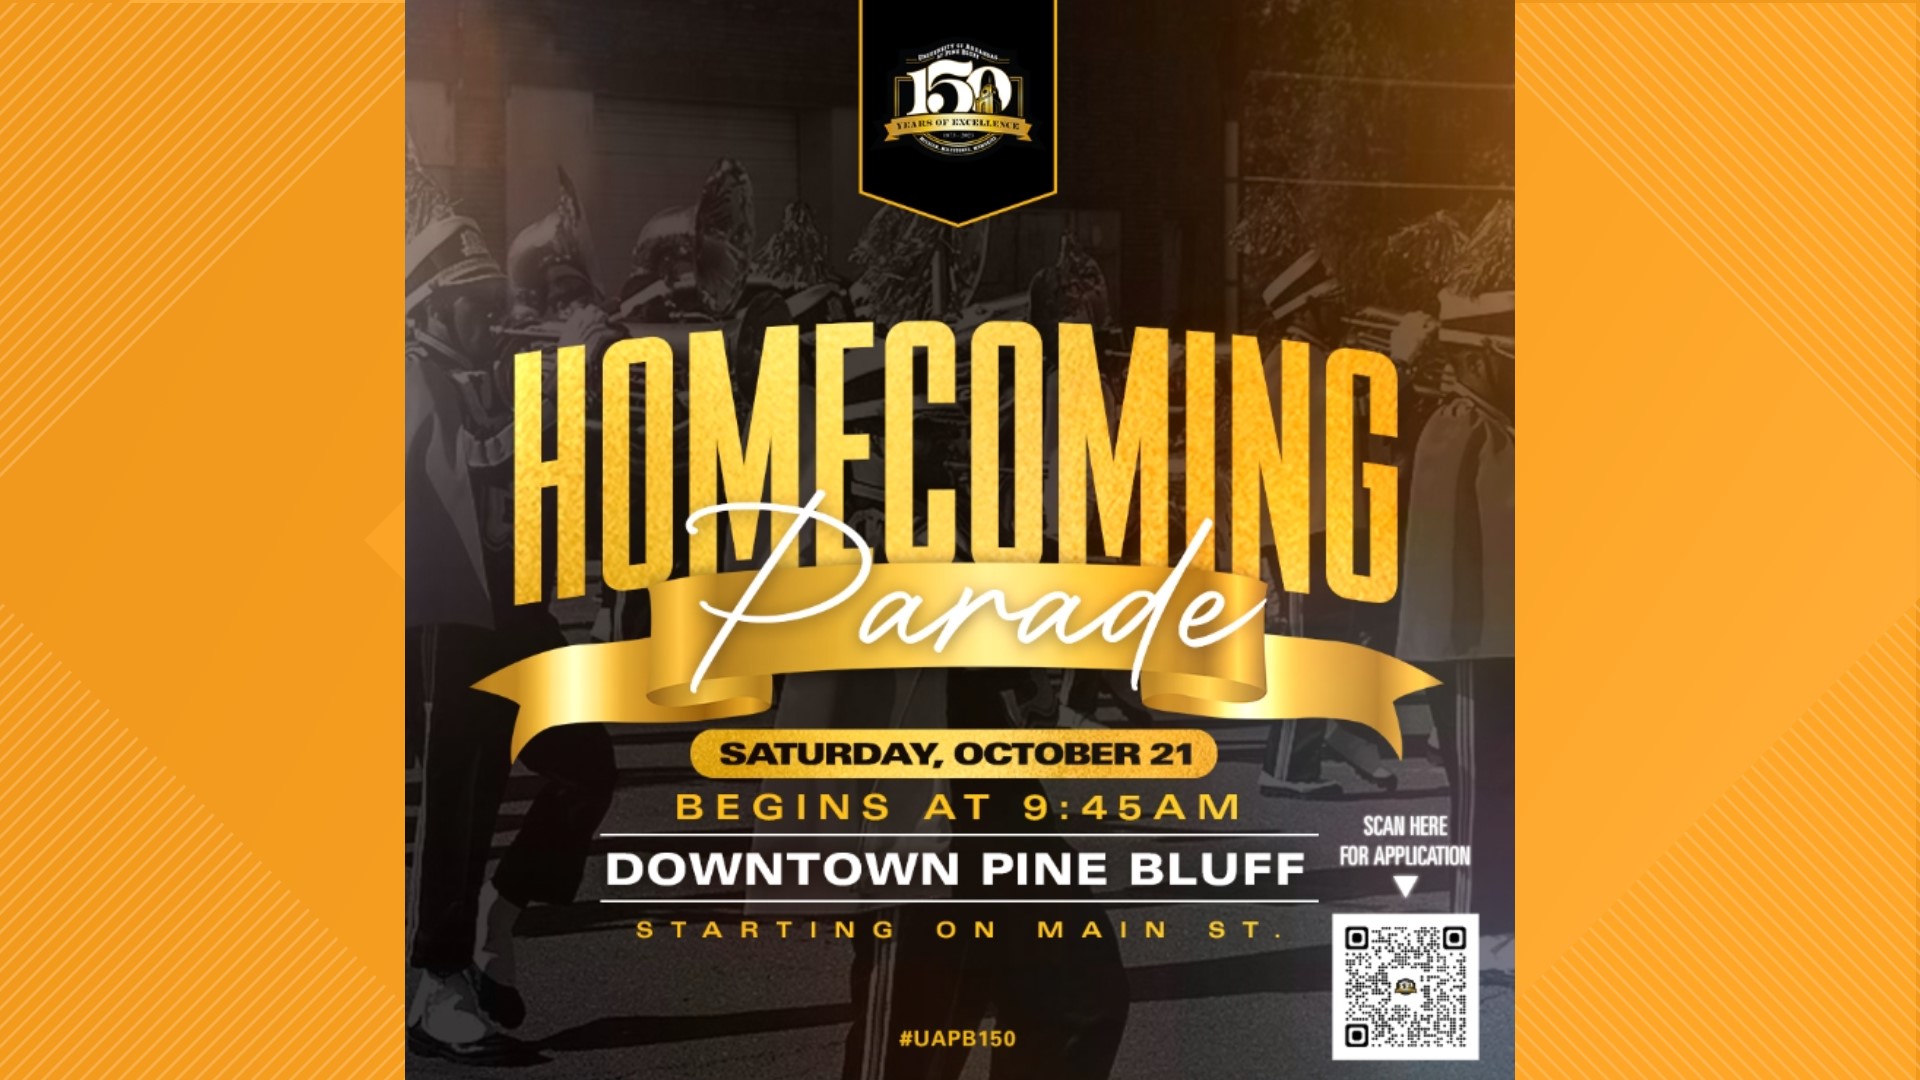 UAPB celebrating with special events